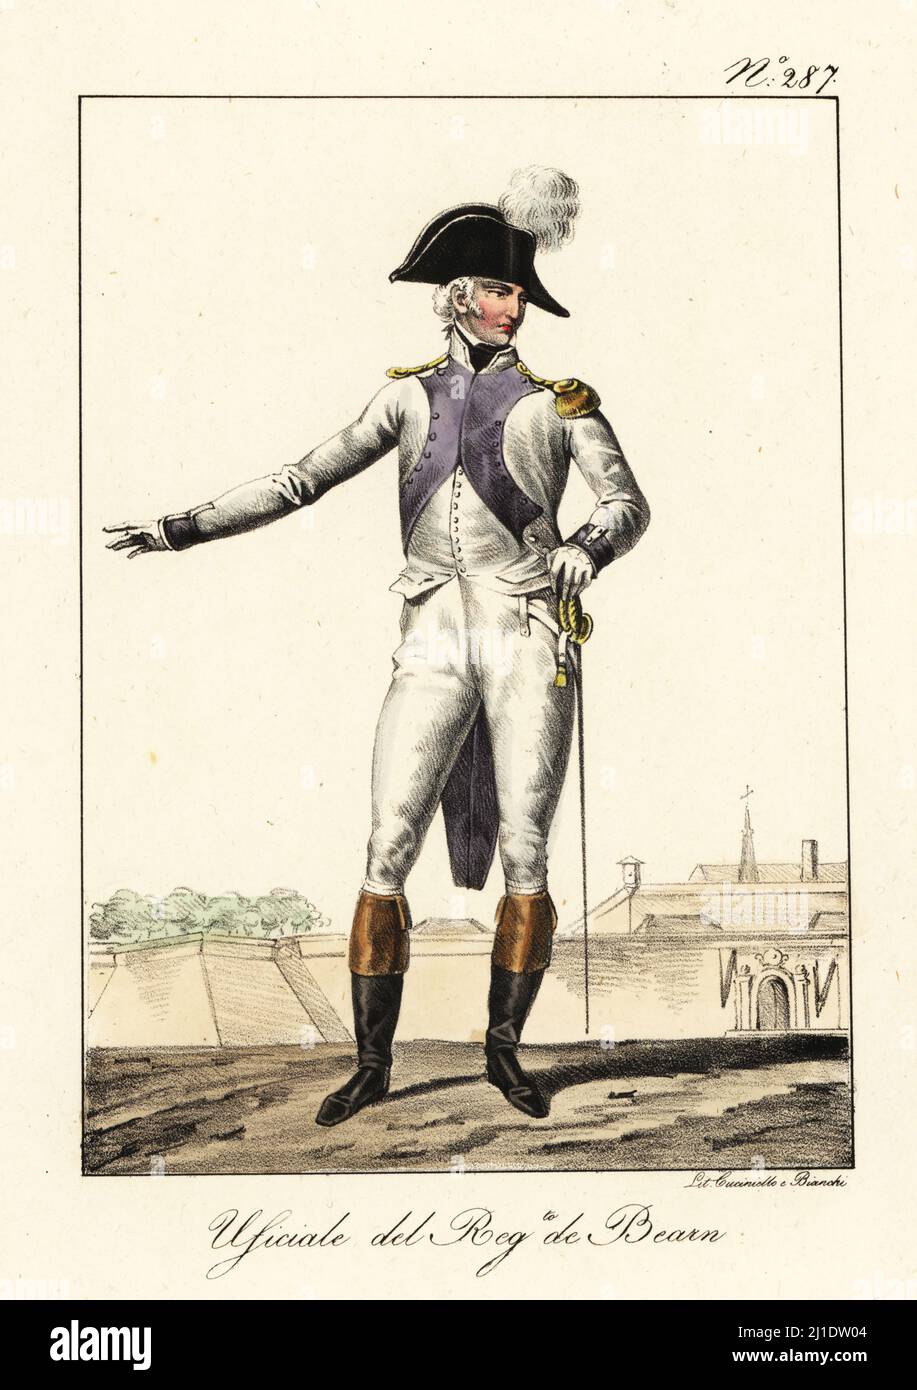 Officer in uniform of the Bearn Regiment, late 18th century. French Army regiment active from 1684-1762 that fought in the Seven Years' War. In bicorne with plume, white uniform with lilac cuffs and lapels, epaulettes, boots, sabre. Officier au Regiment de Bearn. Handcoloured lithograph by Lorenzo Bianchi and Domenico Cuciniello after Hippolyte Lecomte from Costumi civili e militari della monarchia francese dal 1200 al 1820, Naples, 1825. Italian edition of Lecomte’s Civilian and military costumes of the French monarchy from 1200 to 1820. Stock Photo